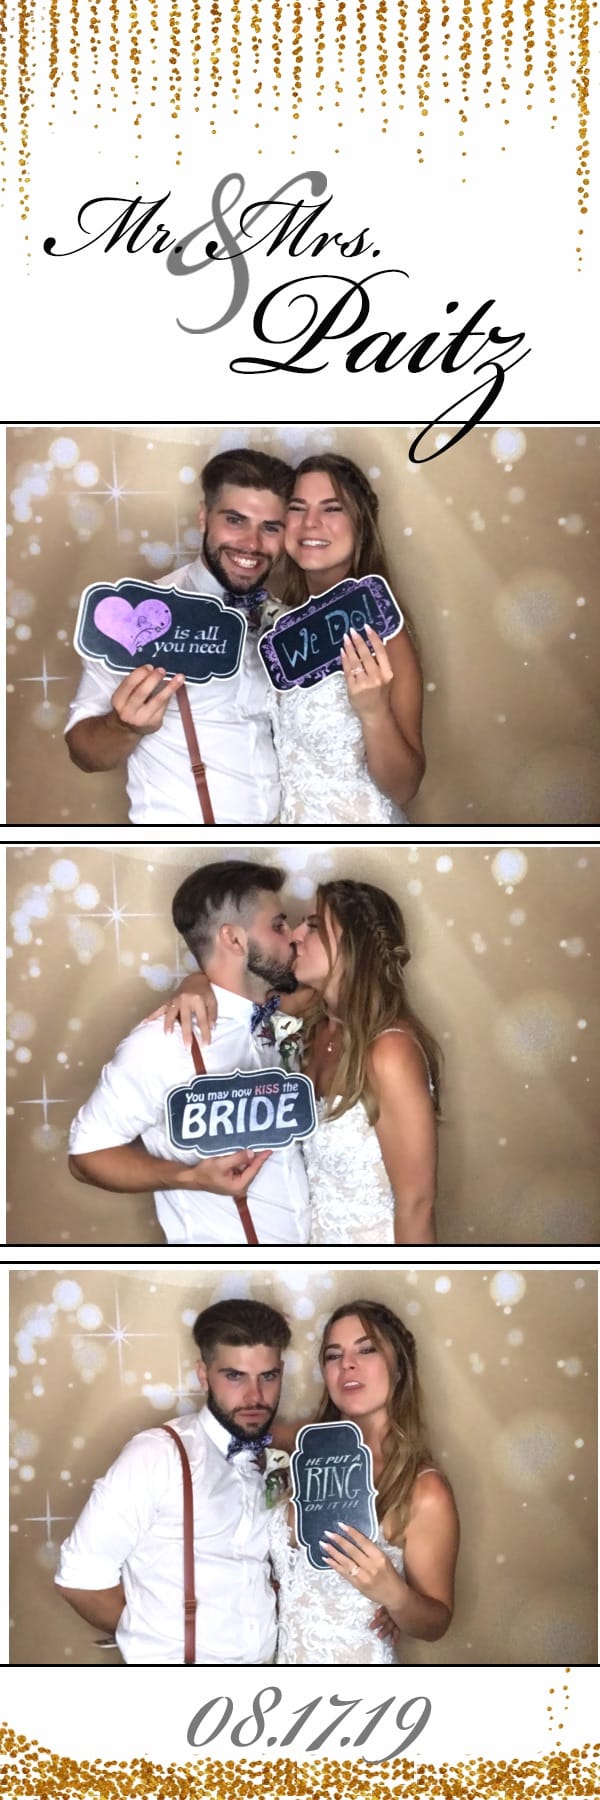 2x6 photo strip of couple with props in front of light bokeh backdrop